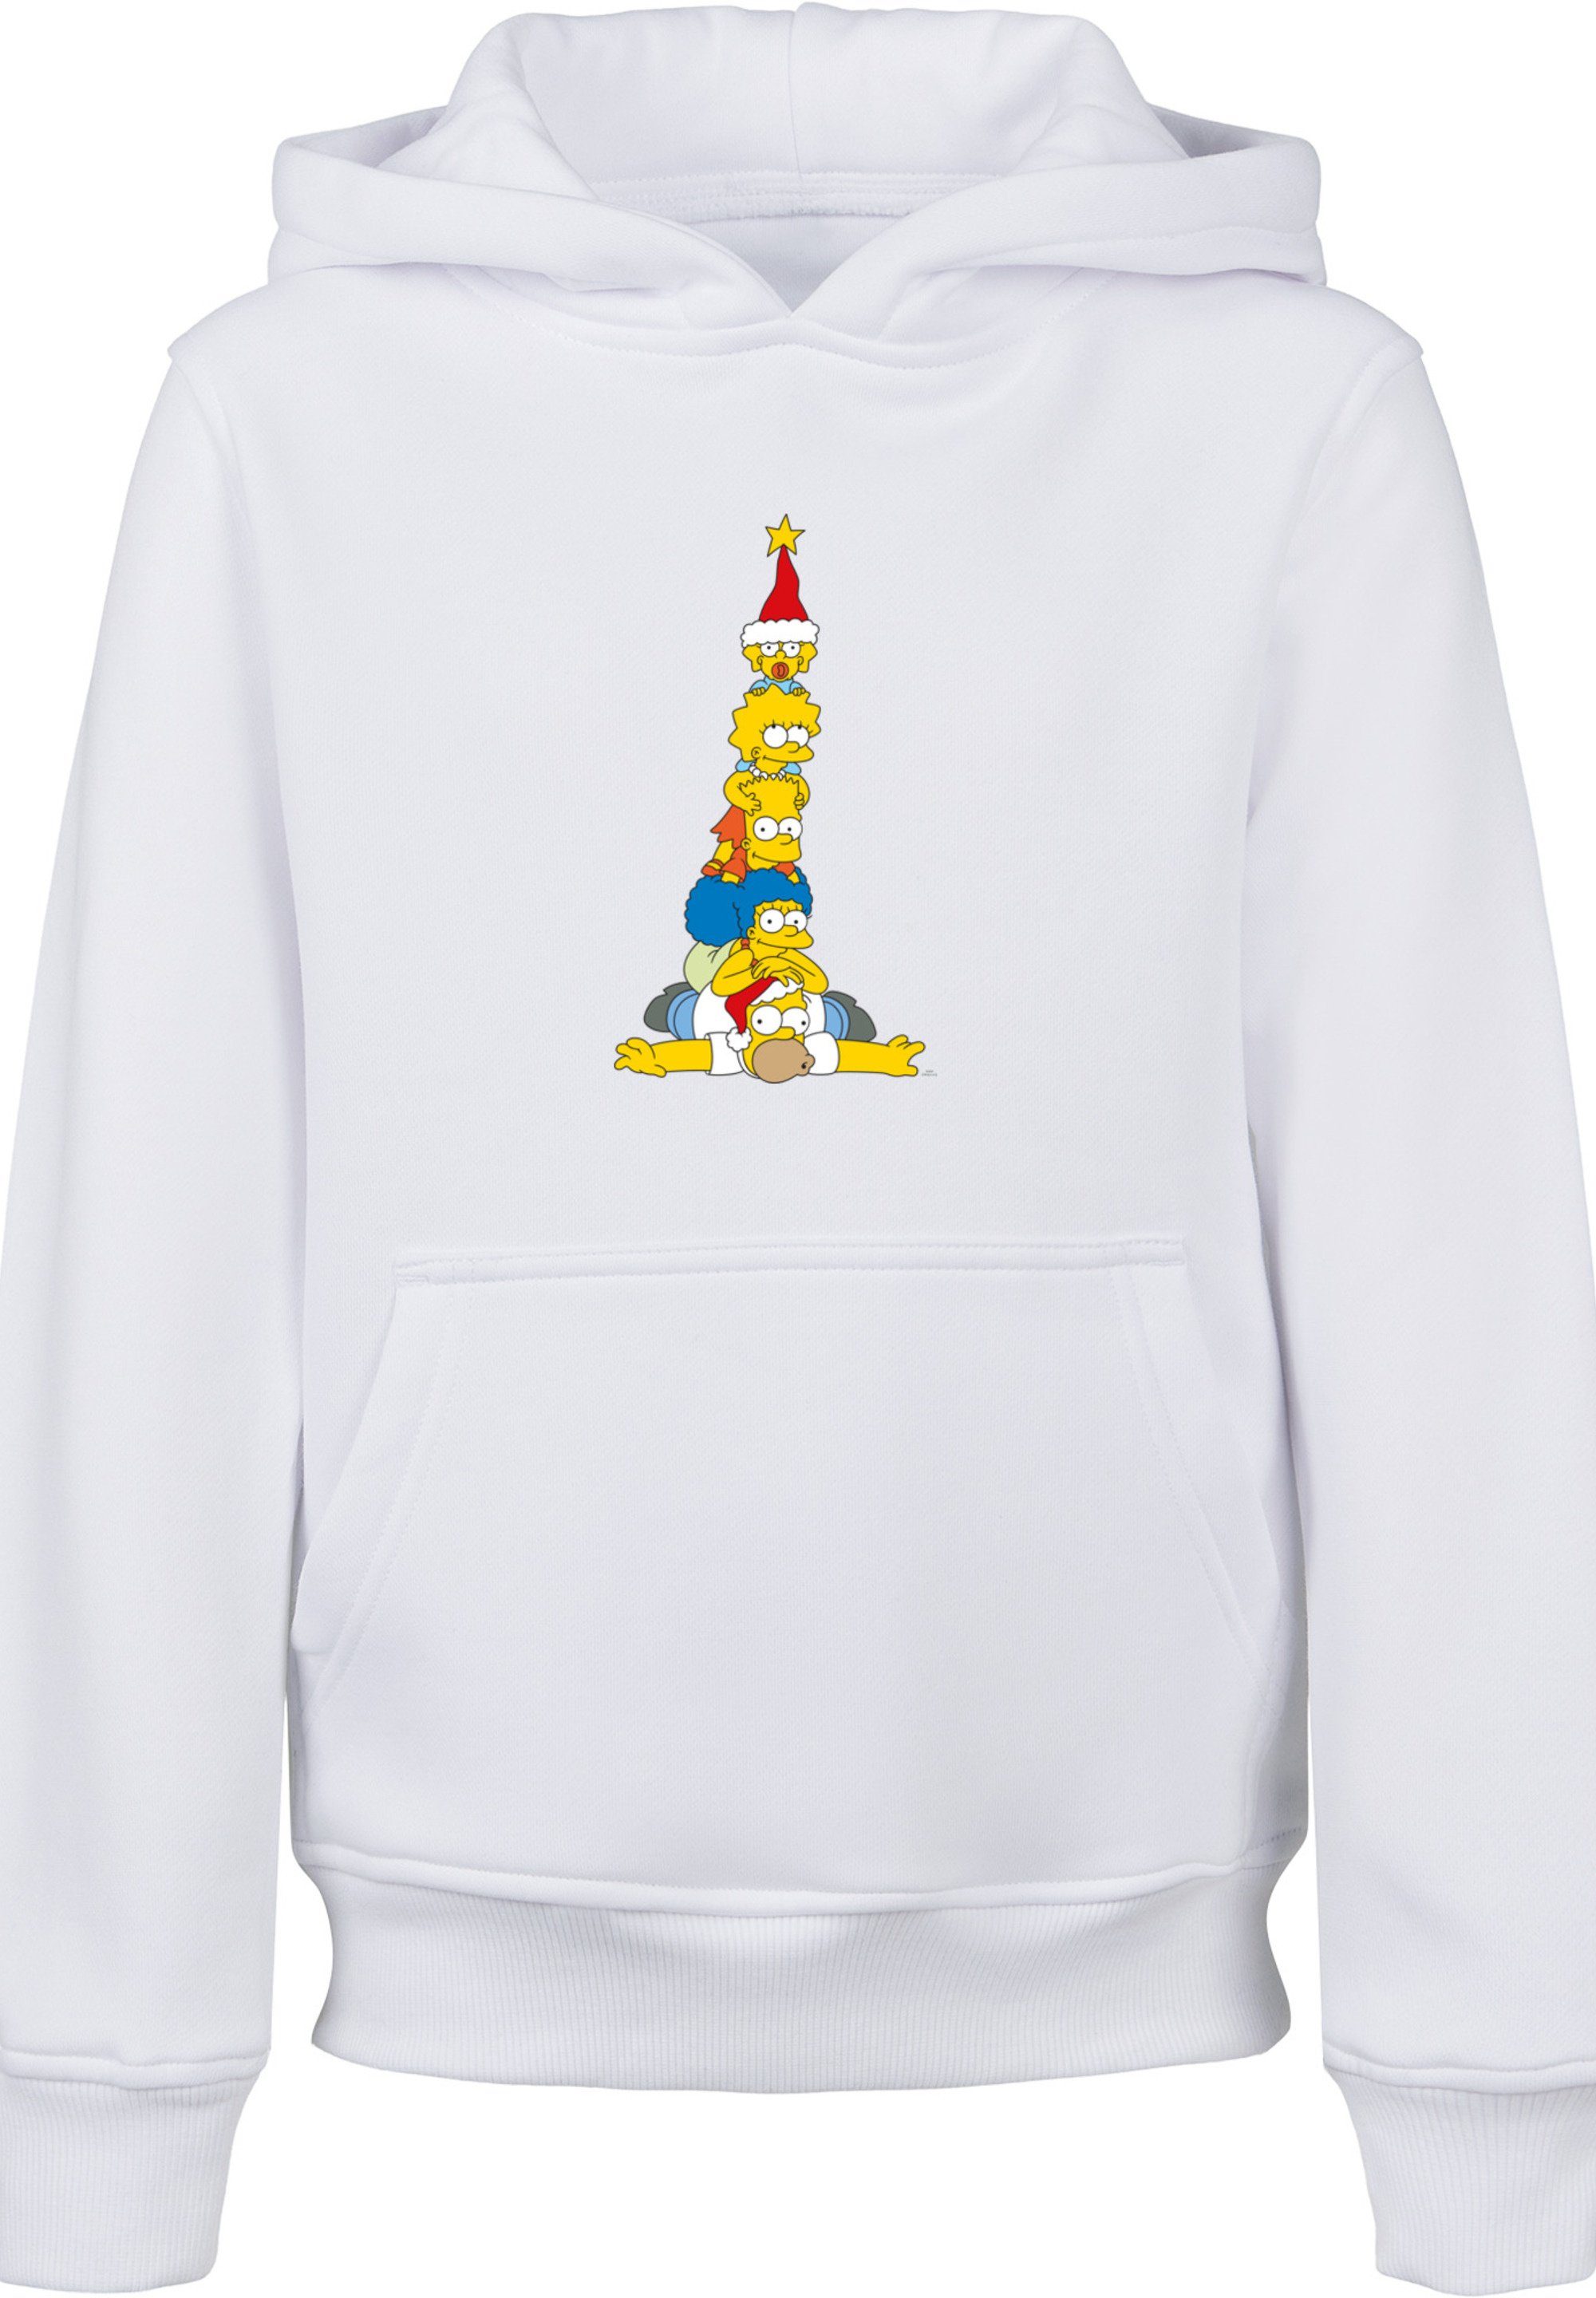 F4NT4STIC Simpsons Kapuzenpullover Print Family Weihnachtsbaum weiß The Christmas